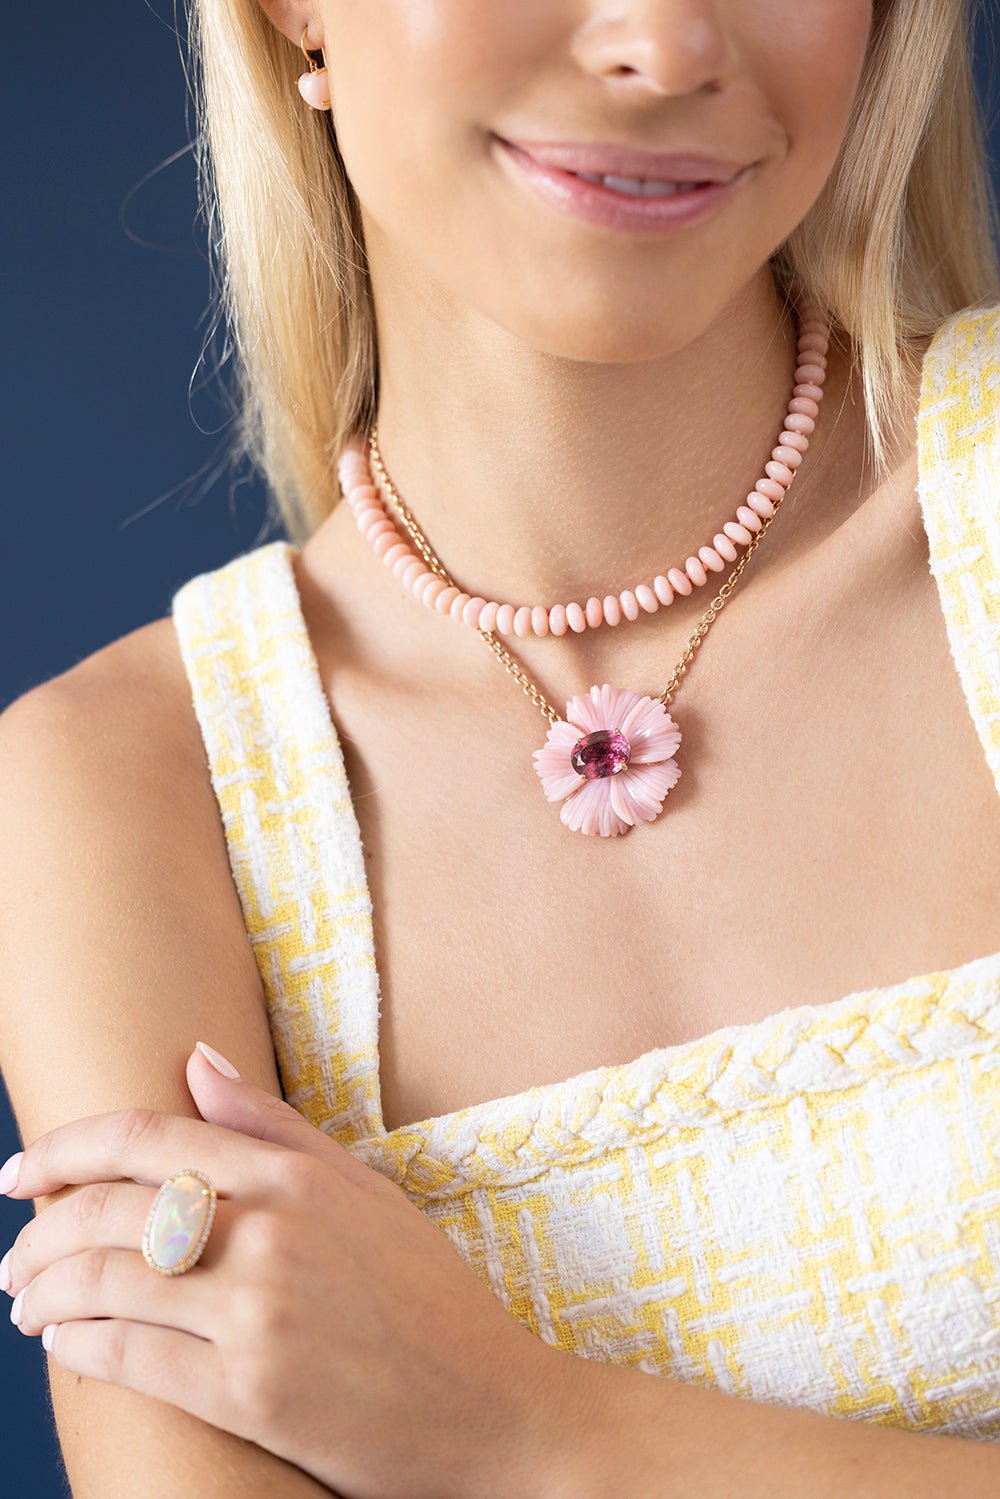 IRENE NEUWIRTH JEWELRY-Pink Opal Bead Necklace-ROSE GOLD